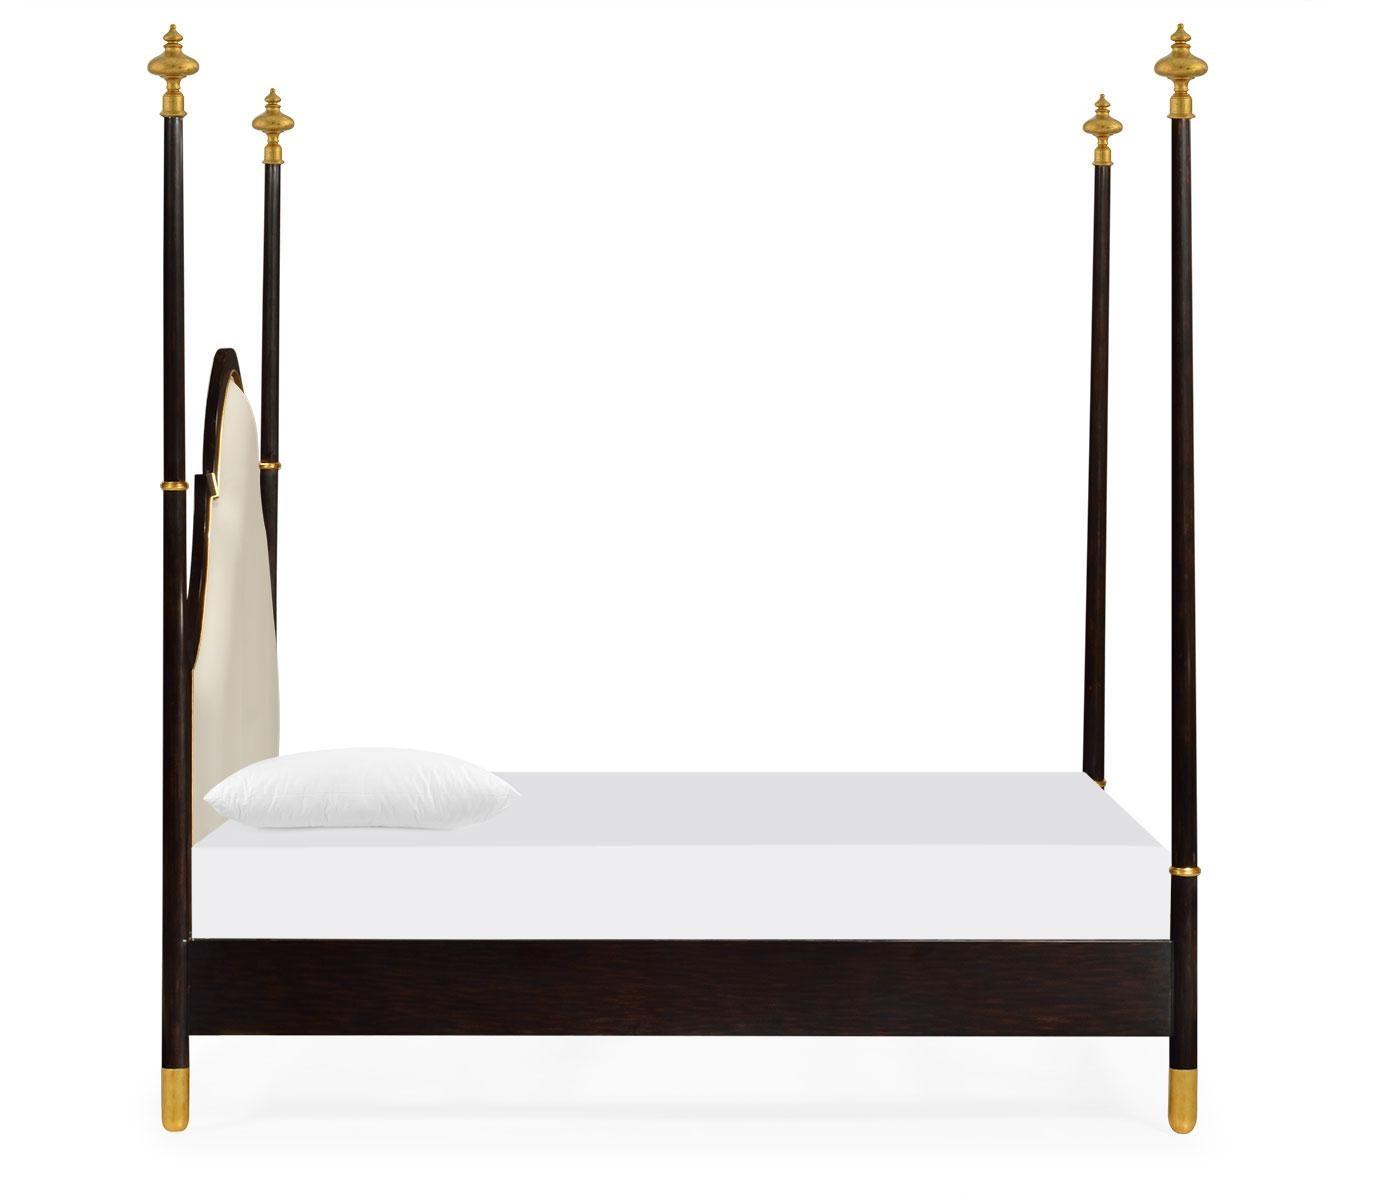 A stunning, handcrafted four-poster bed in leather and gold leaf detailing. 

Finished in ebony, this bed features a wonderfully curved headboard upholstered with genuine leather in cream. Paying close attention to detail, the piece features